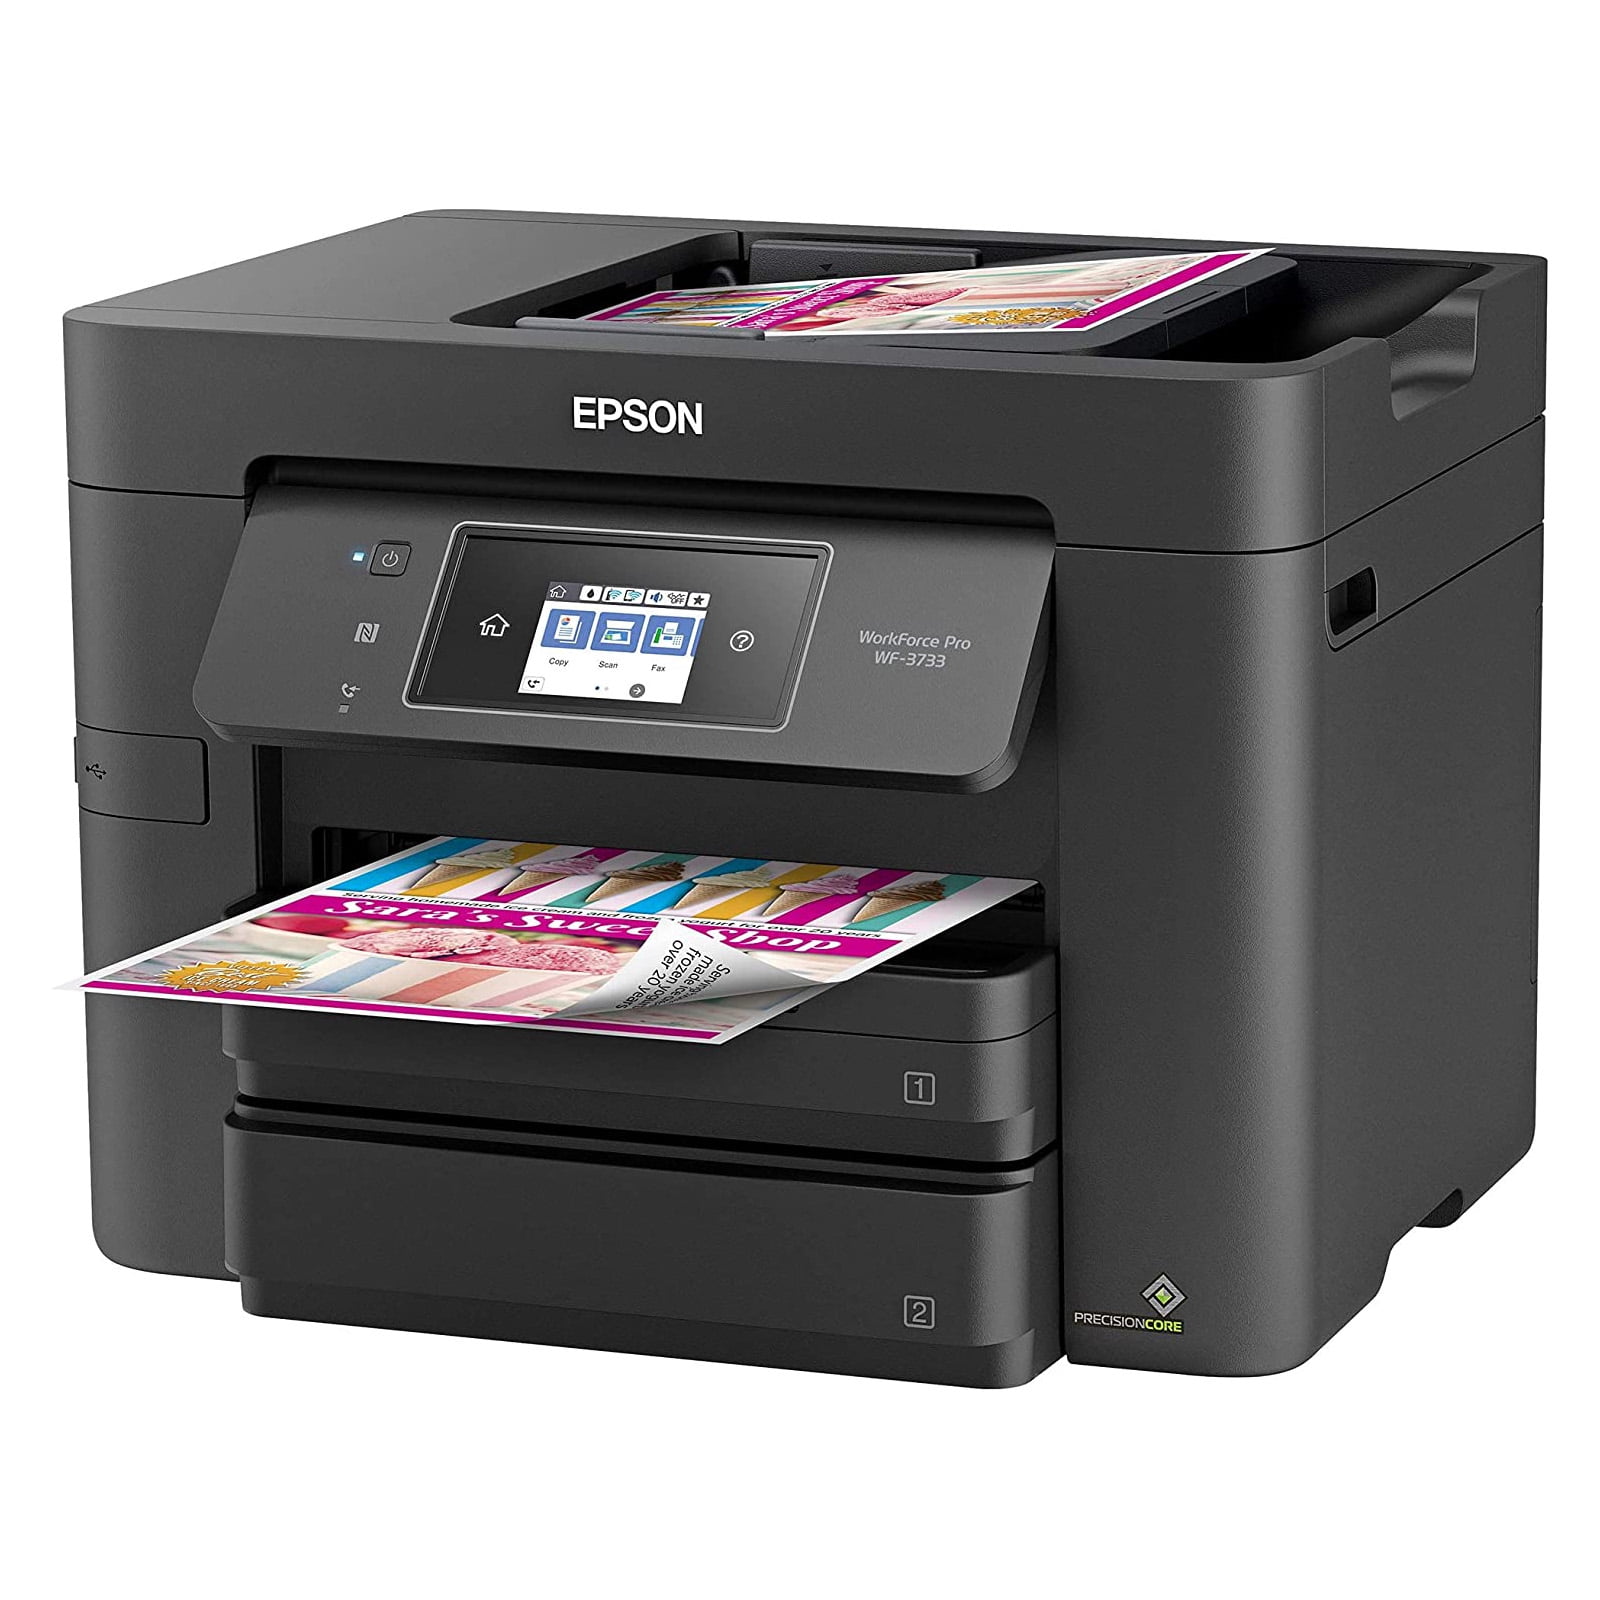 Epson Workforce Pro Wf 3733 Wireless All In One Color Inkjet Printer Home Office Printer 3123